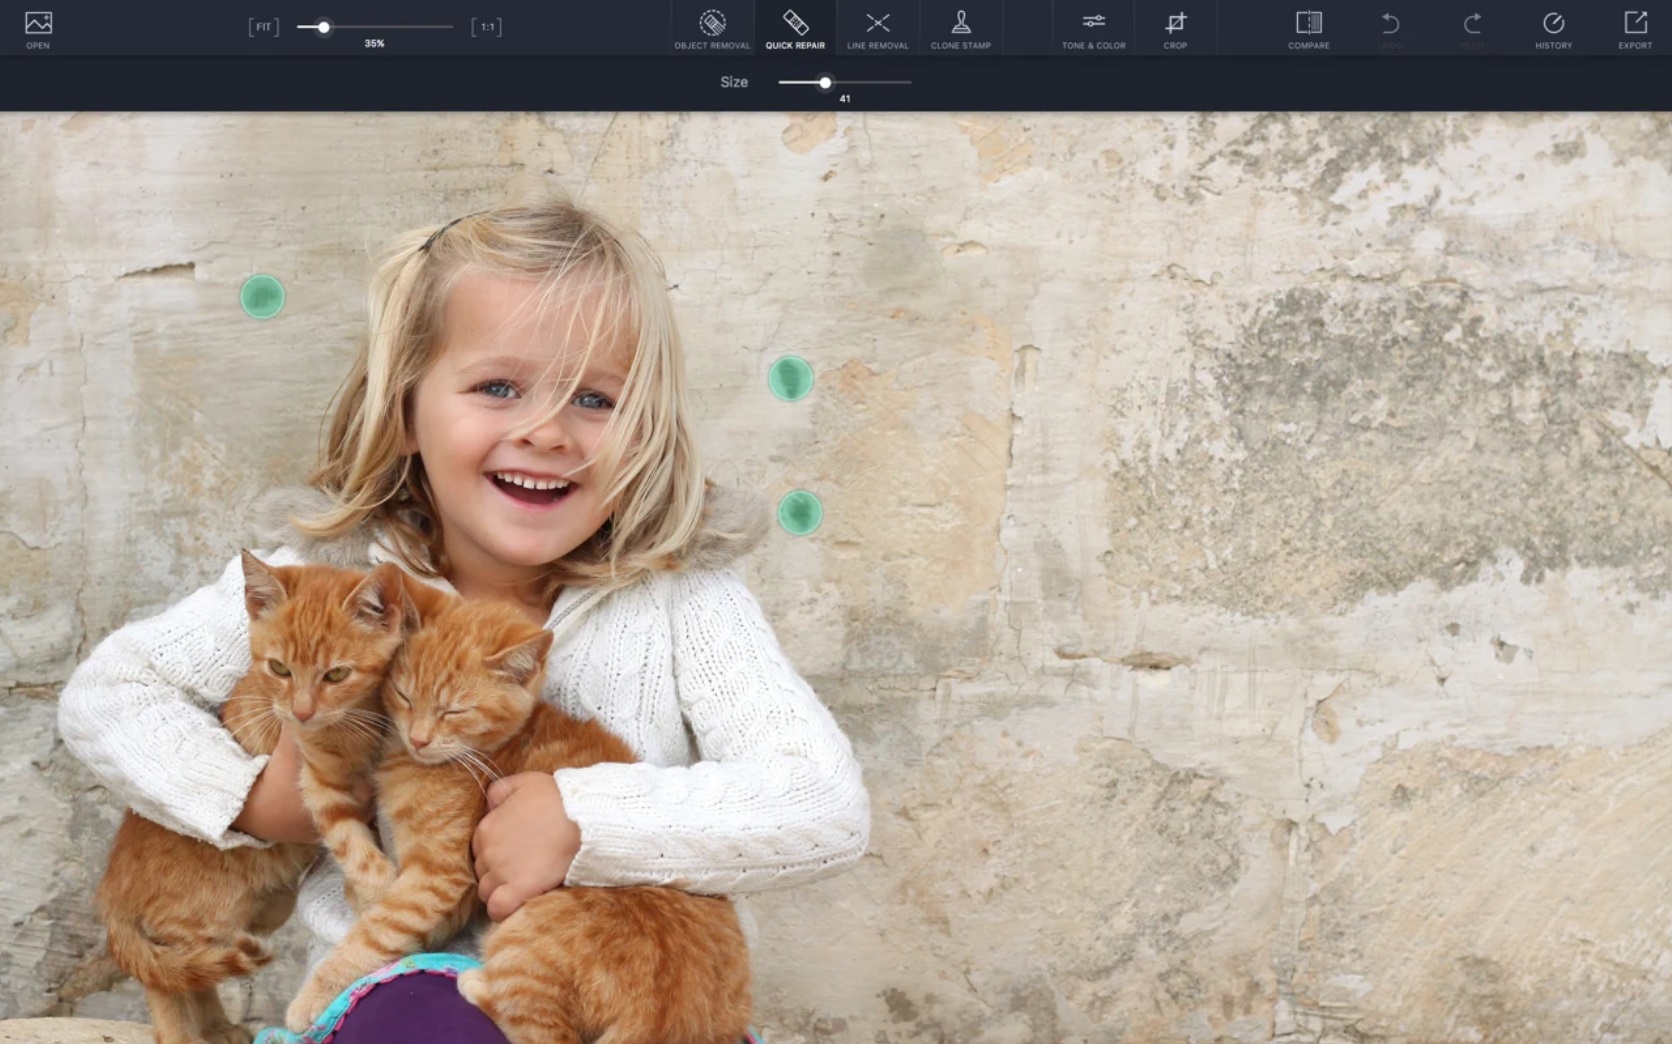 TouchRetouch 2.3 : Removing Unwanted Spots